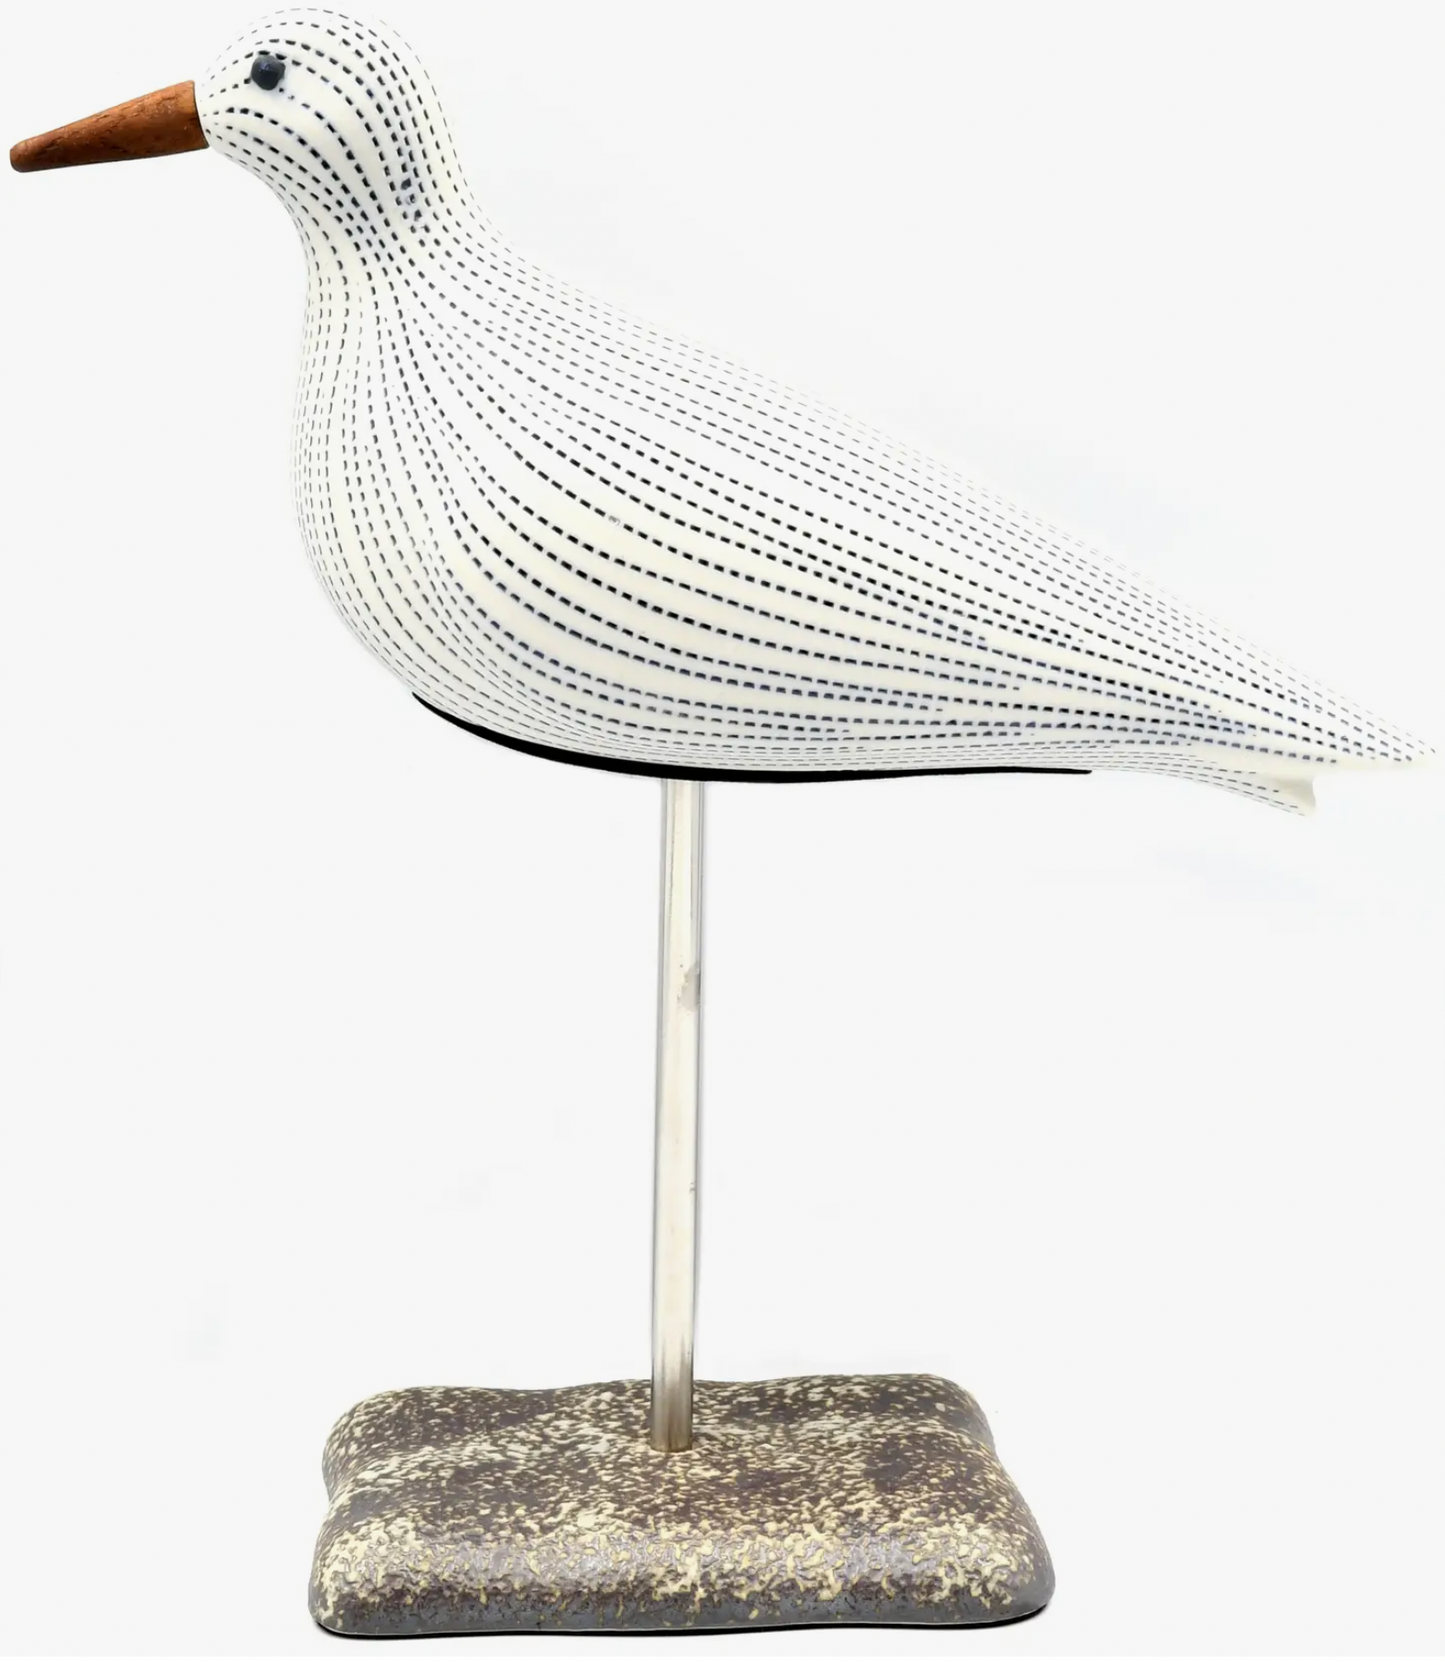 Blue and White Seagull Sculpture